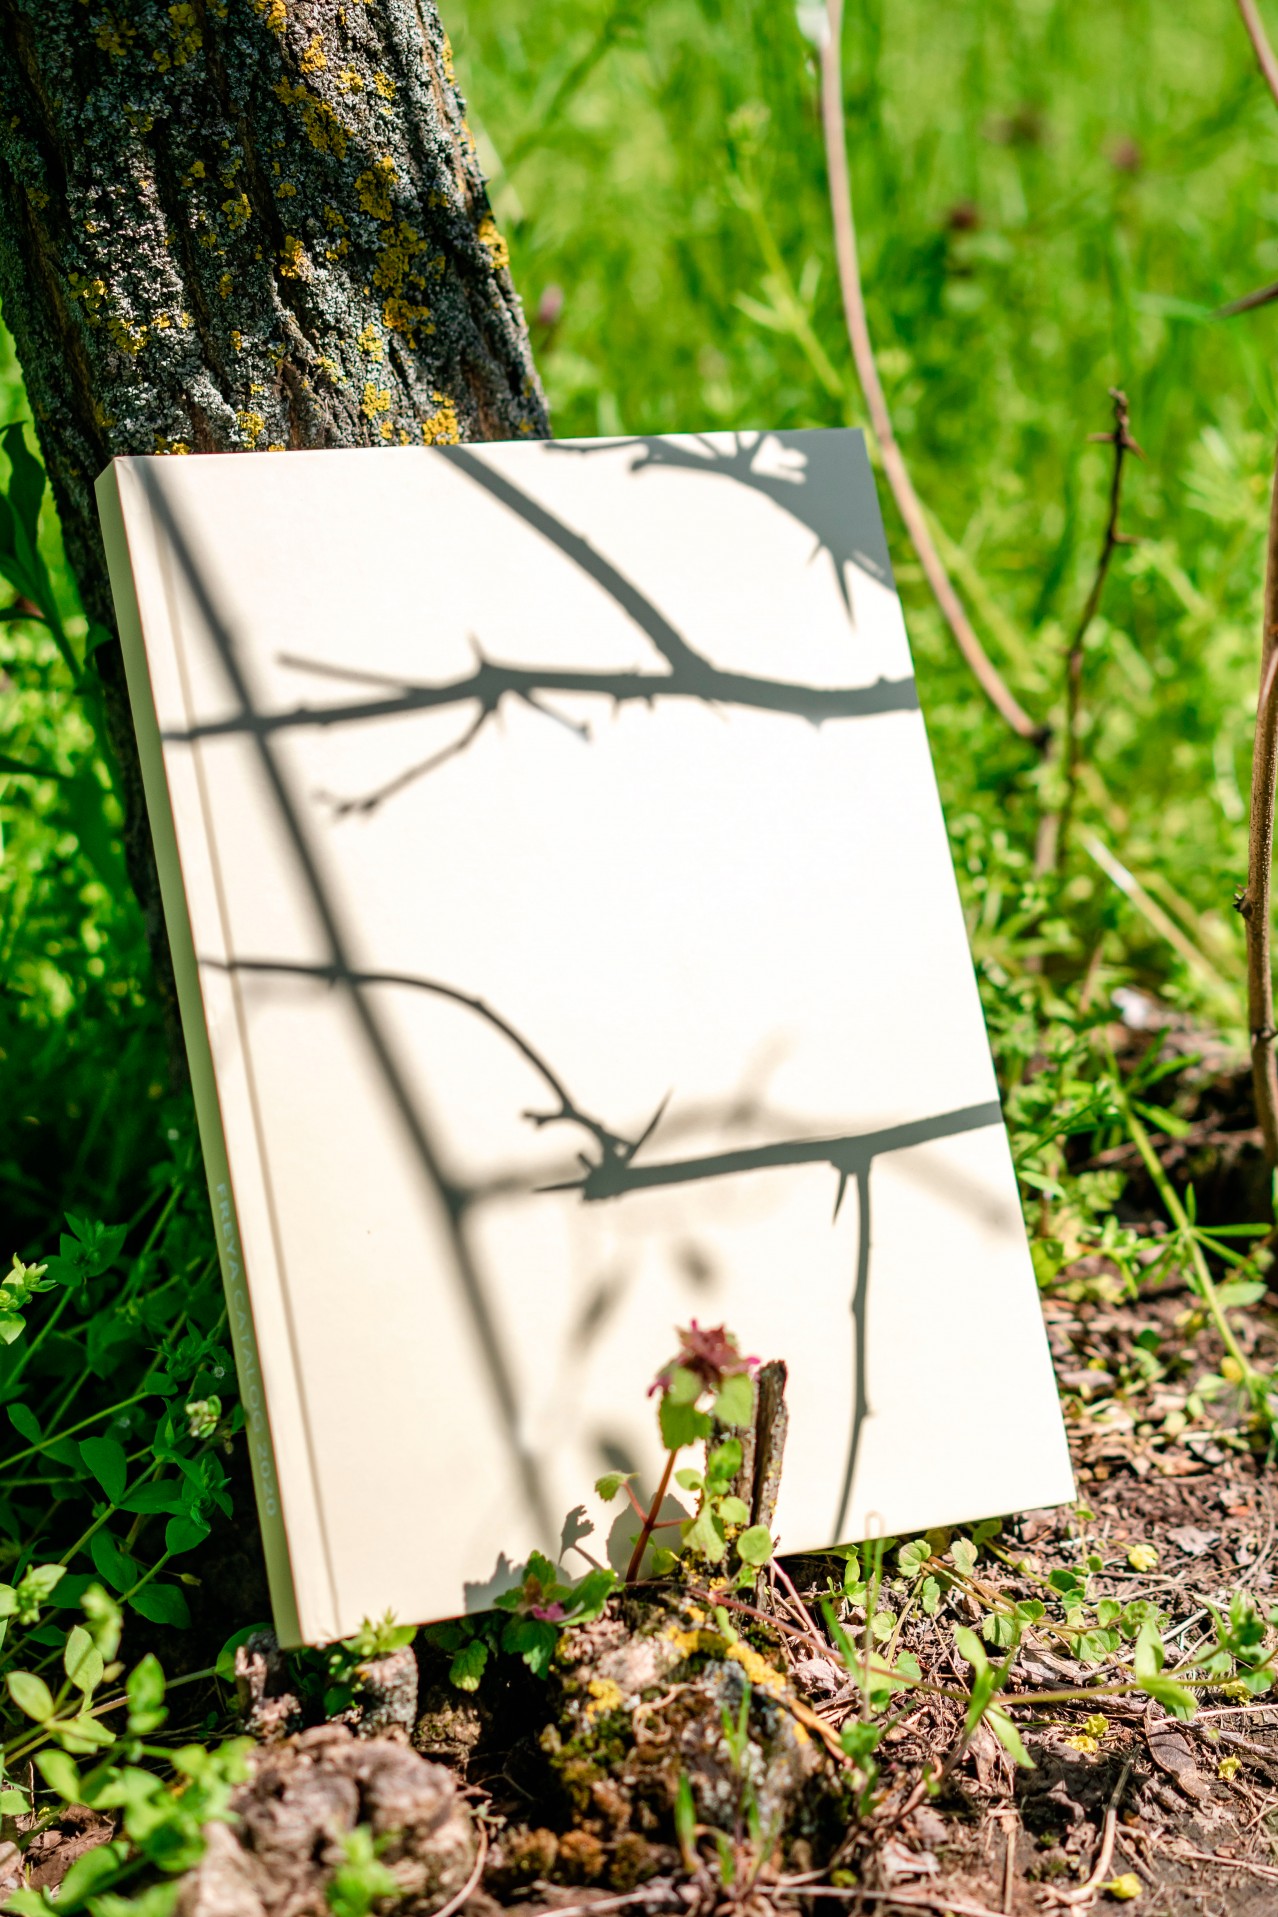 Book catalogue near the tree in the park